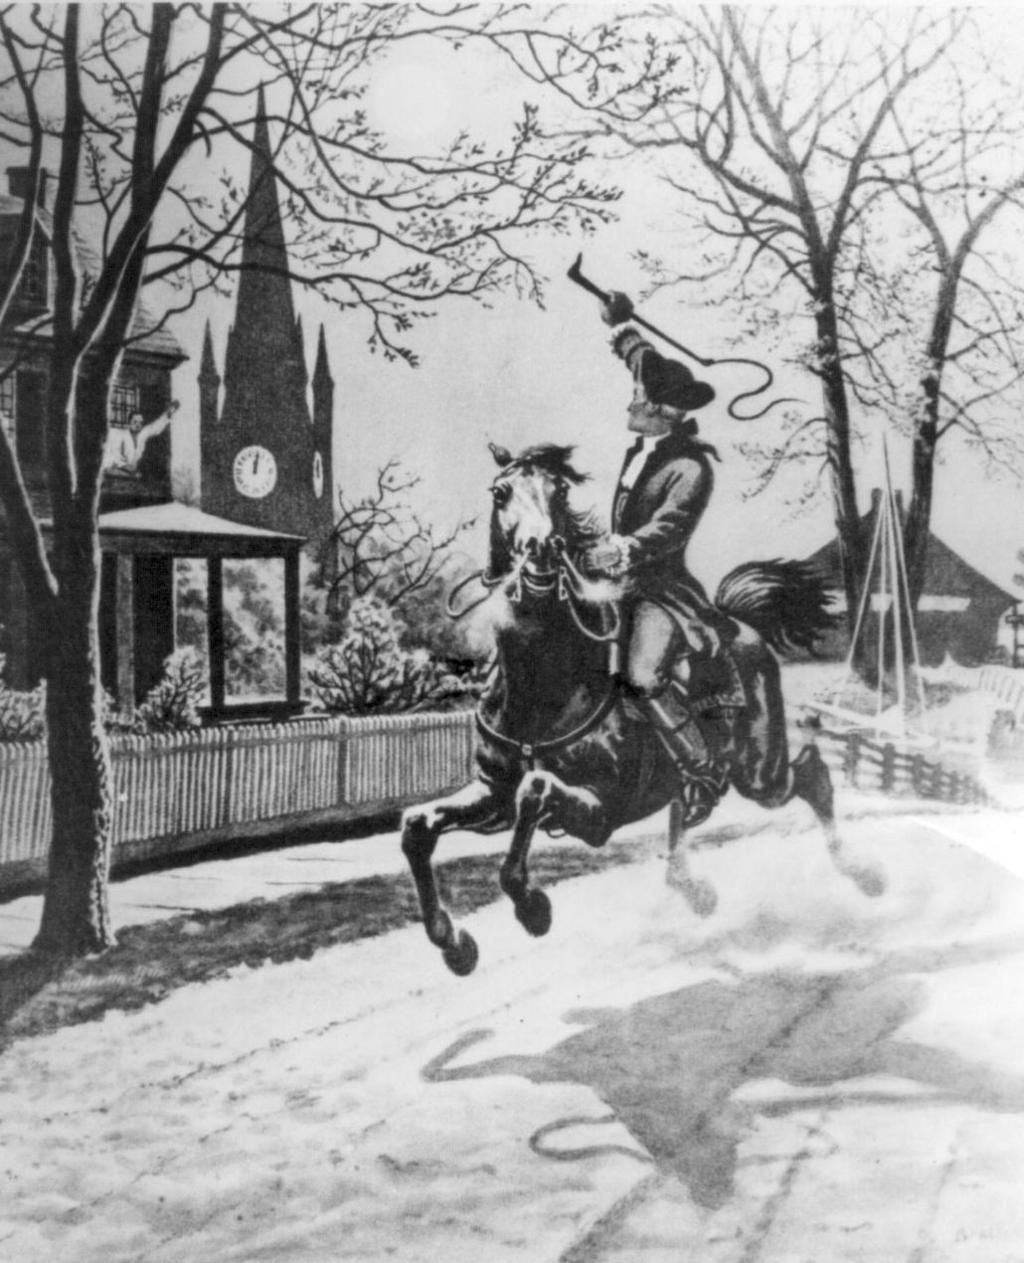 Paul Revere s Midnight Ride Member of the Sons of Liberty who often worked as an express rider, delivering messages Knew trouble was coming and established signals to indicate the position of the